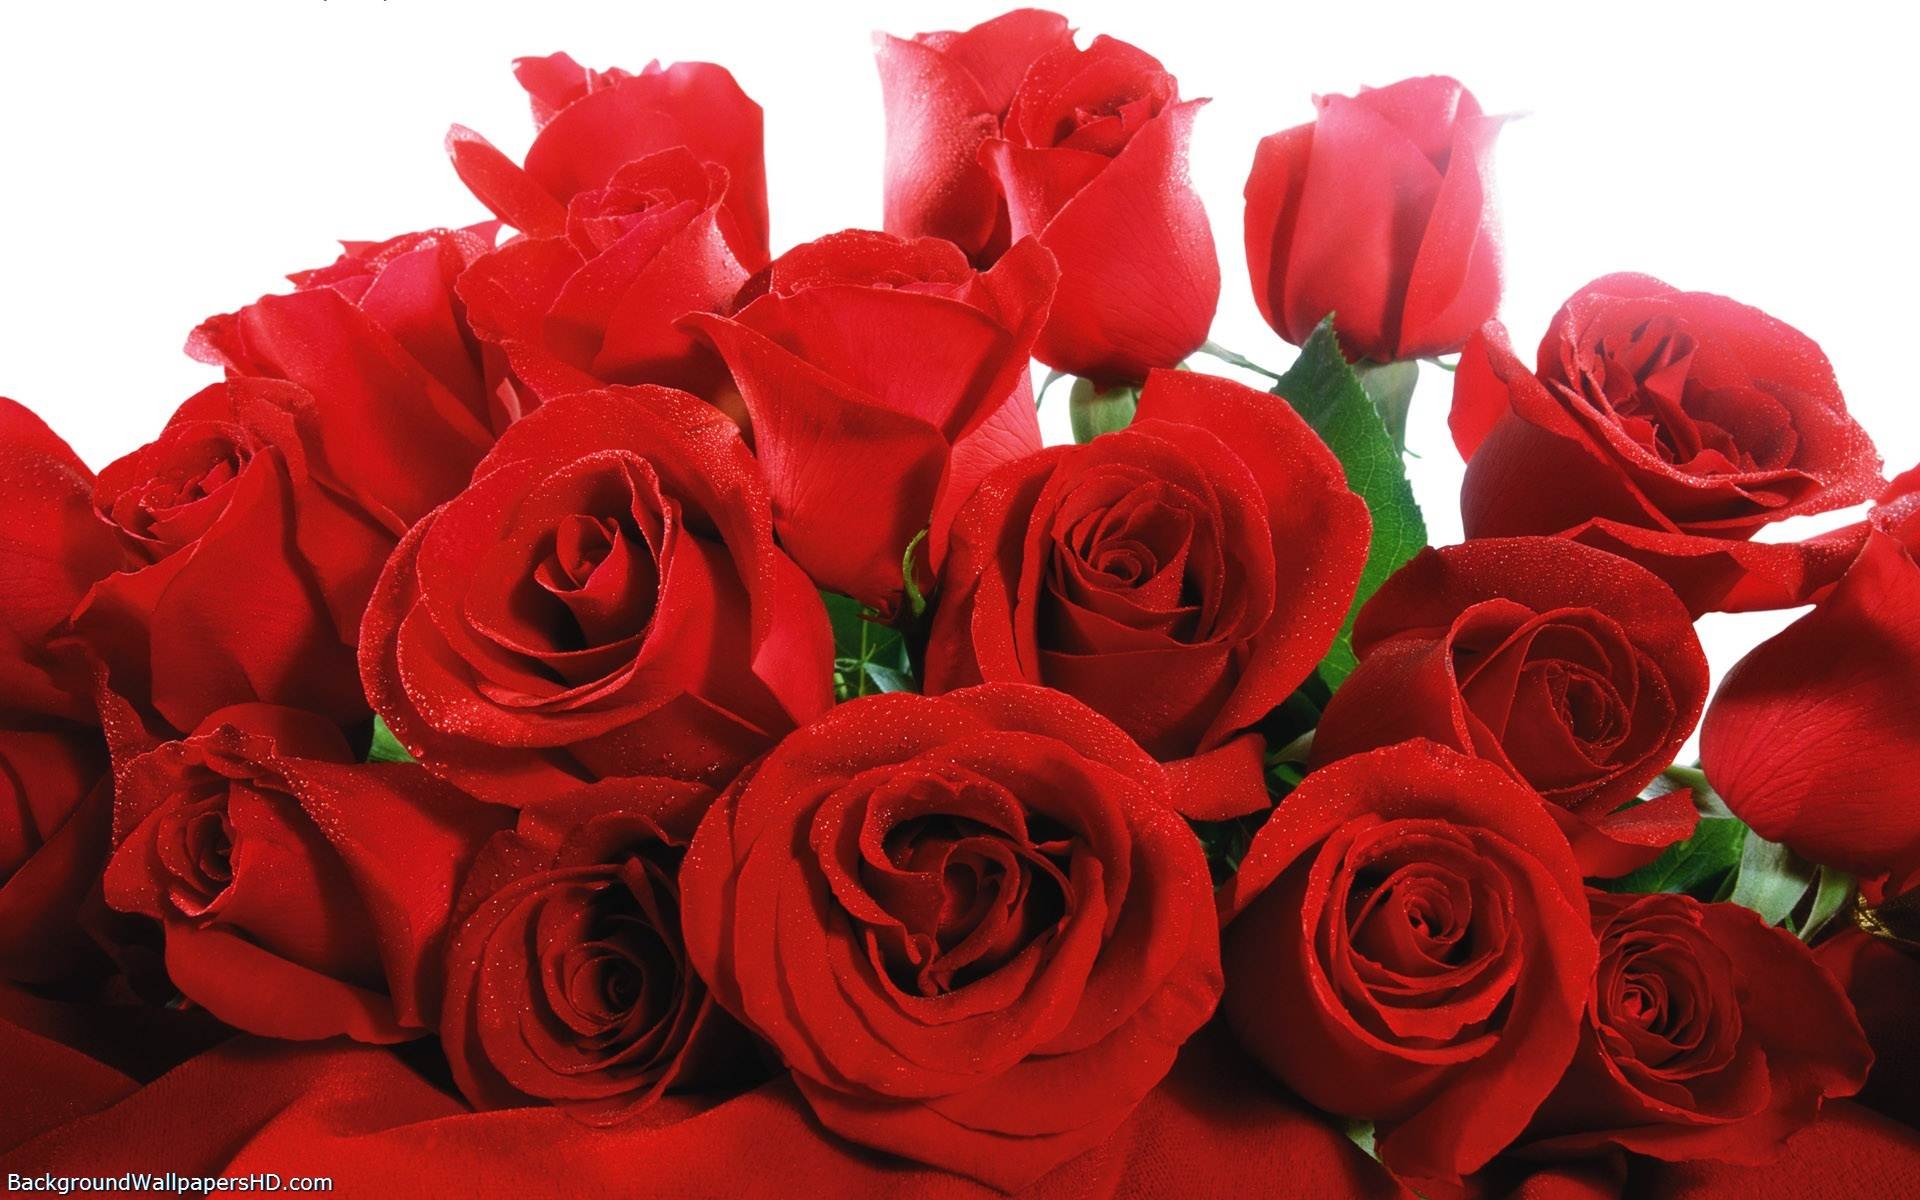 Wallpapers Backgrounds   Red Roses Flower Wallpapers Amazon Walls 1920x1200